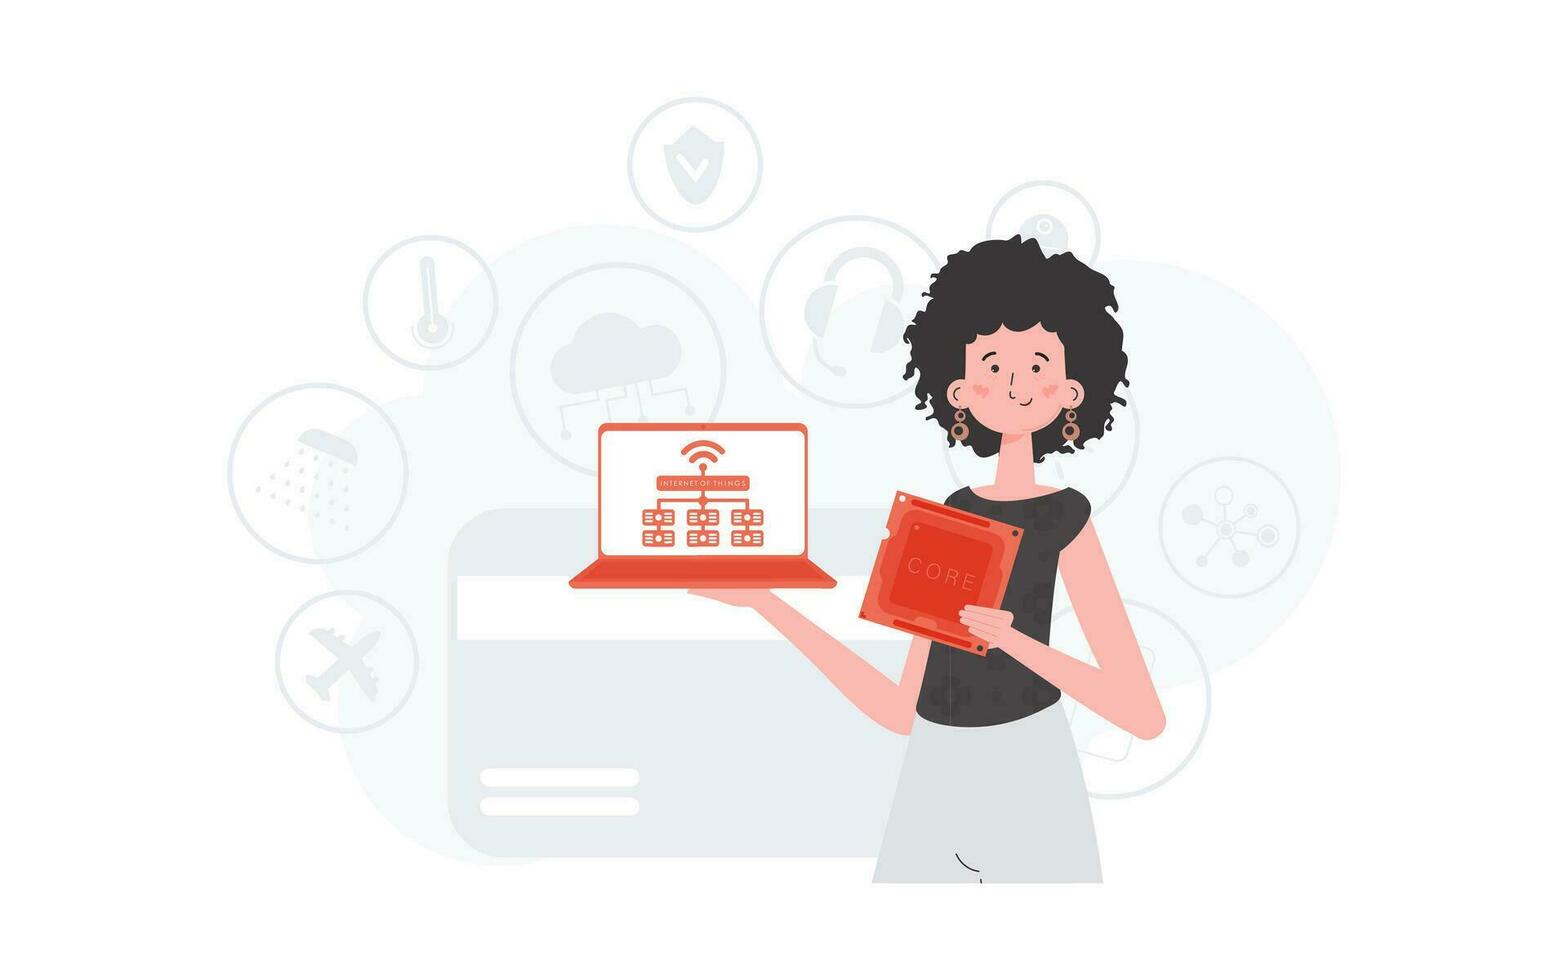 The girl is holding a laptop and a processor chip in her hands. Internet of things concept. Vector illustration in trendy flat style.